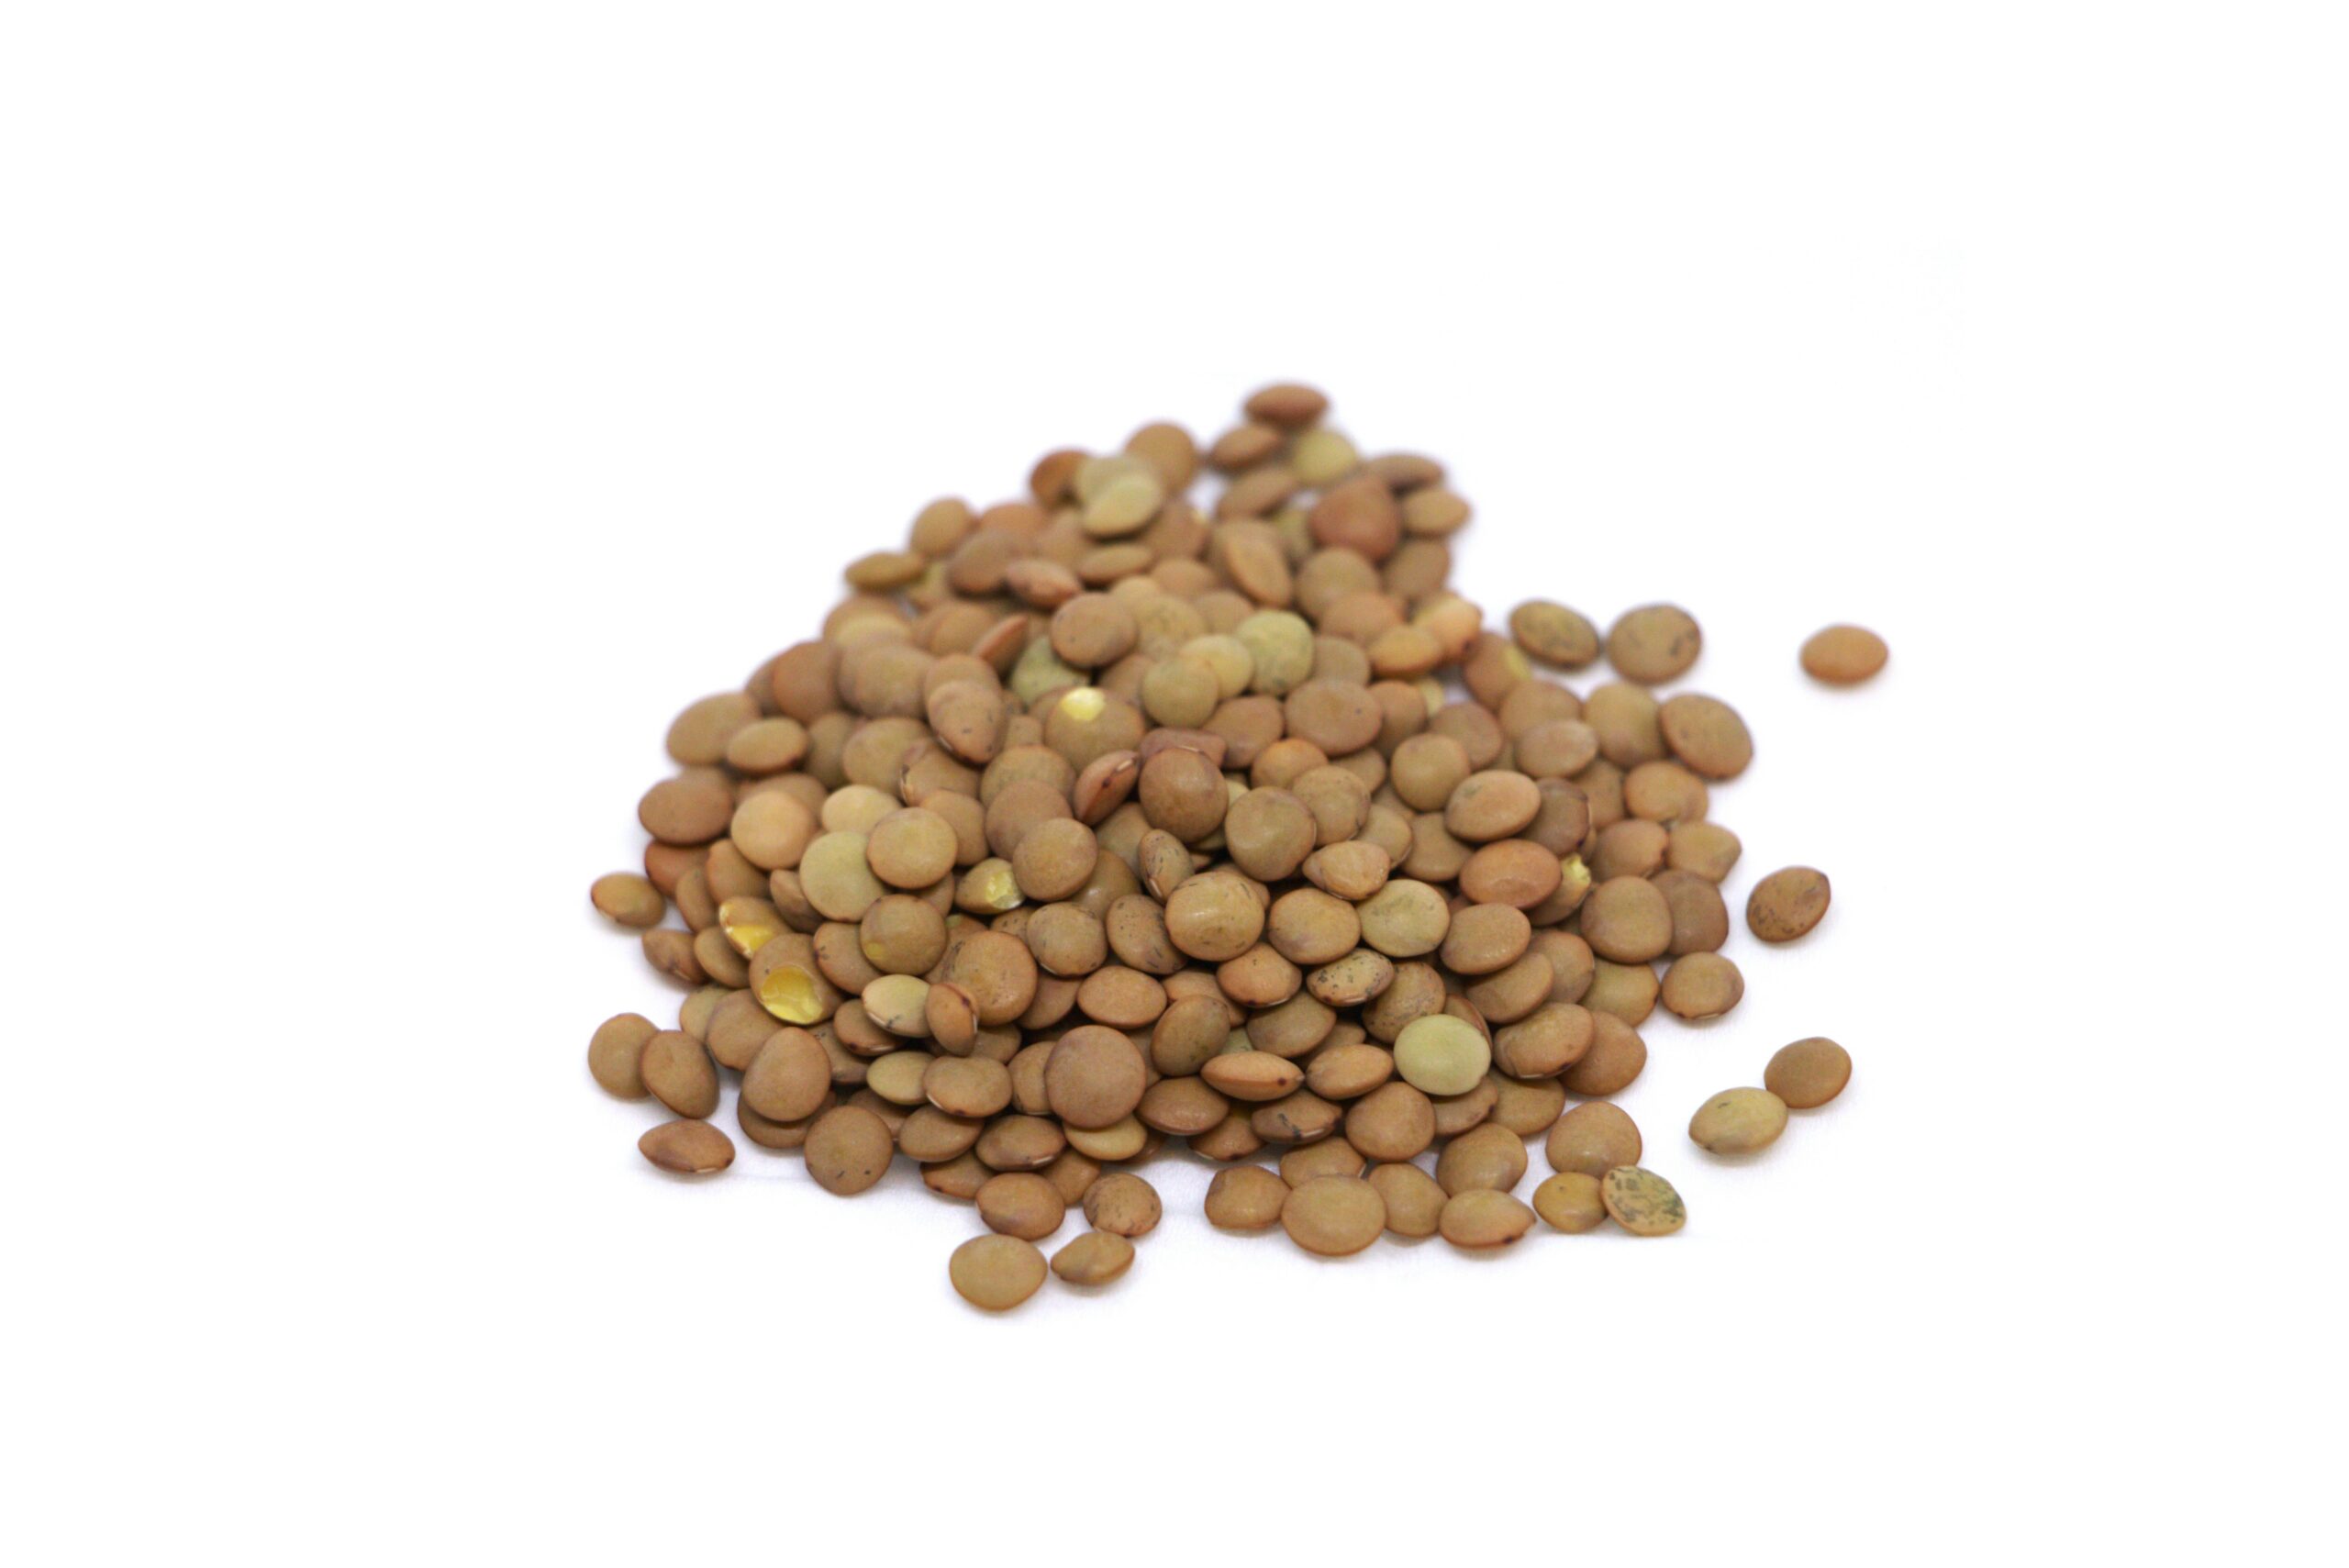 Organic lentils seed for microgreens and sprouts